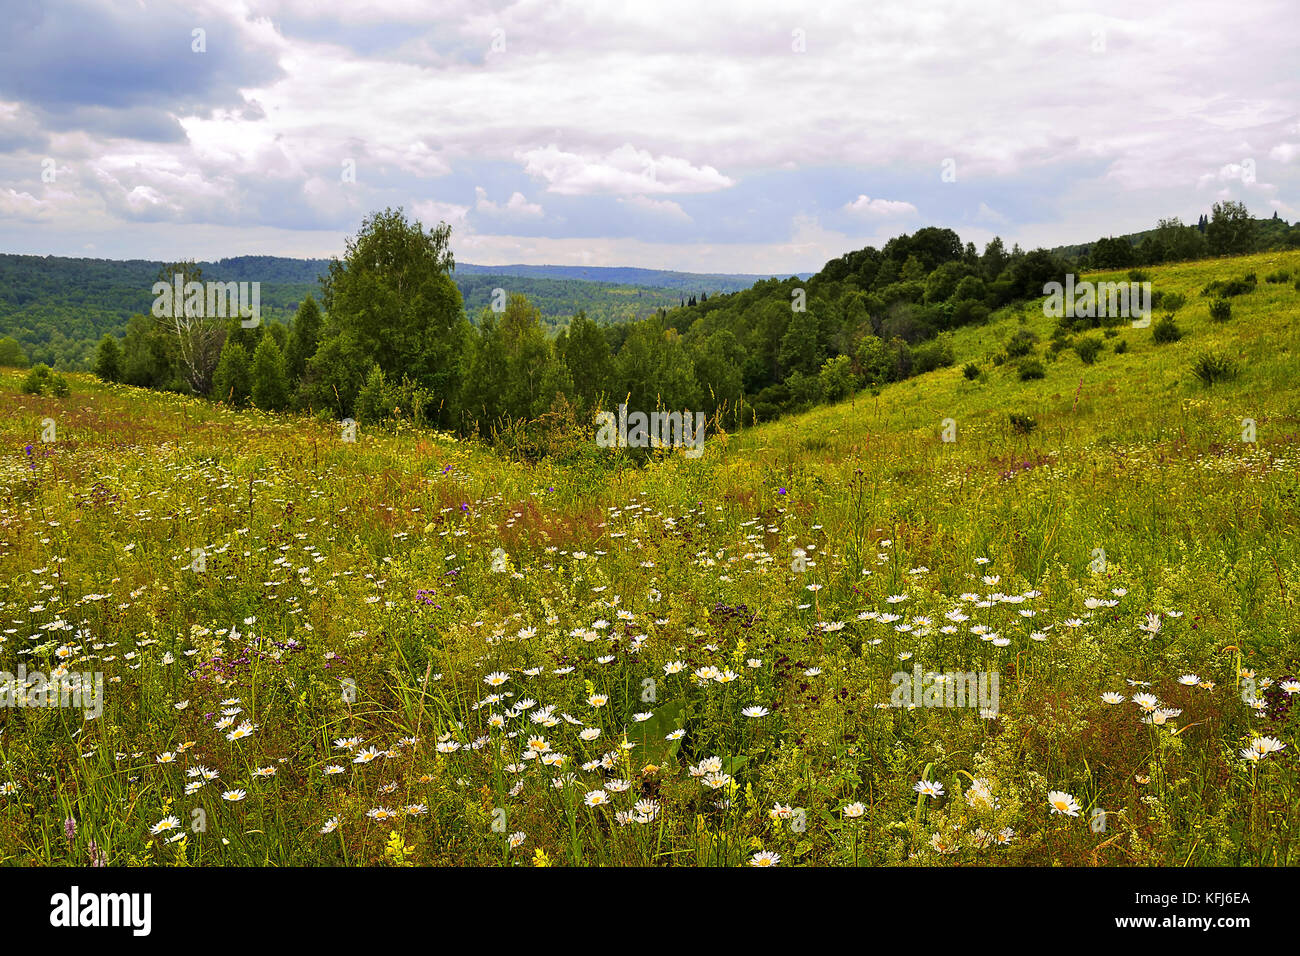 Summer landscape of flowering meadows with pink, white, blue and yellow flowers, medicinal and melliferous plants on a background of hills Stock Photo